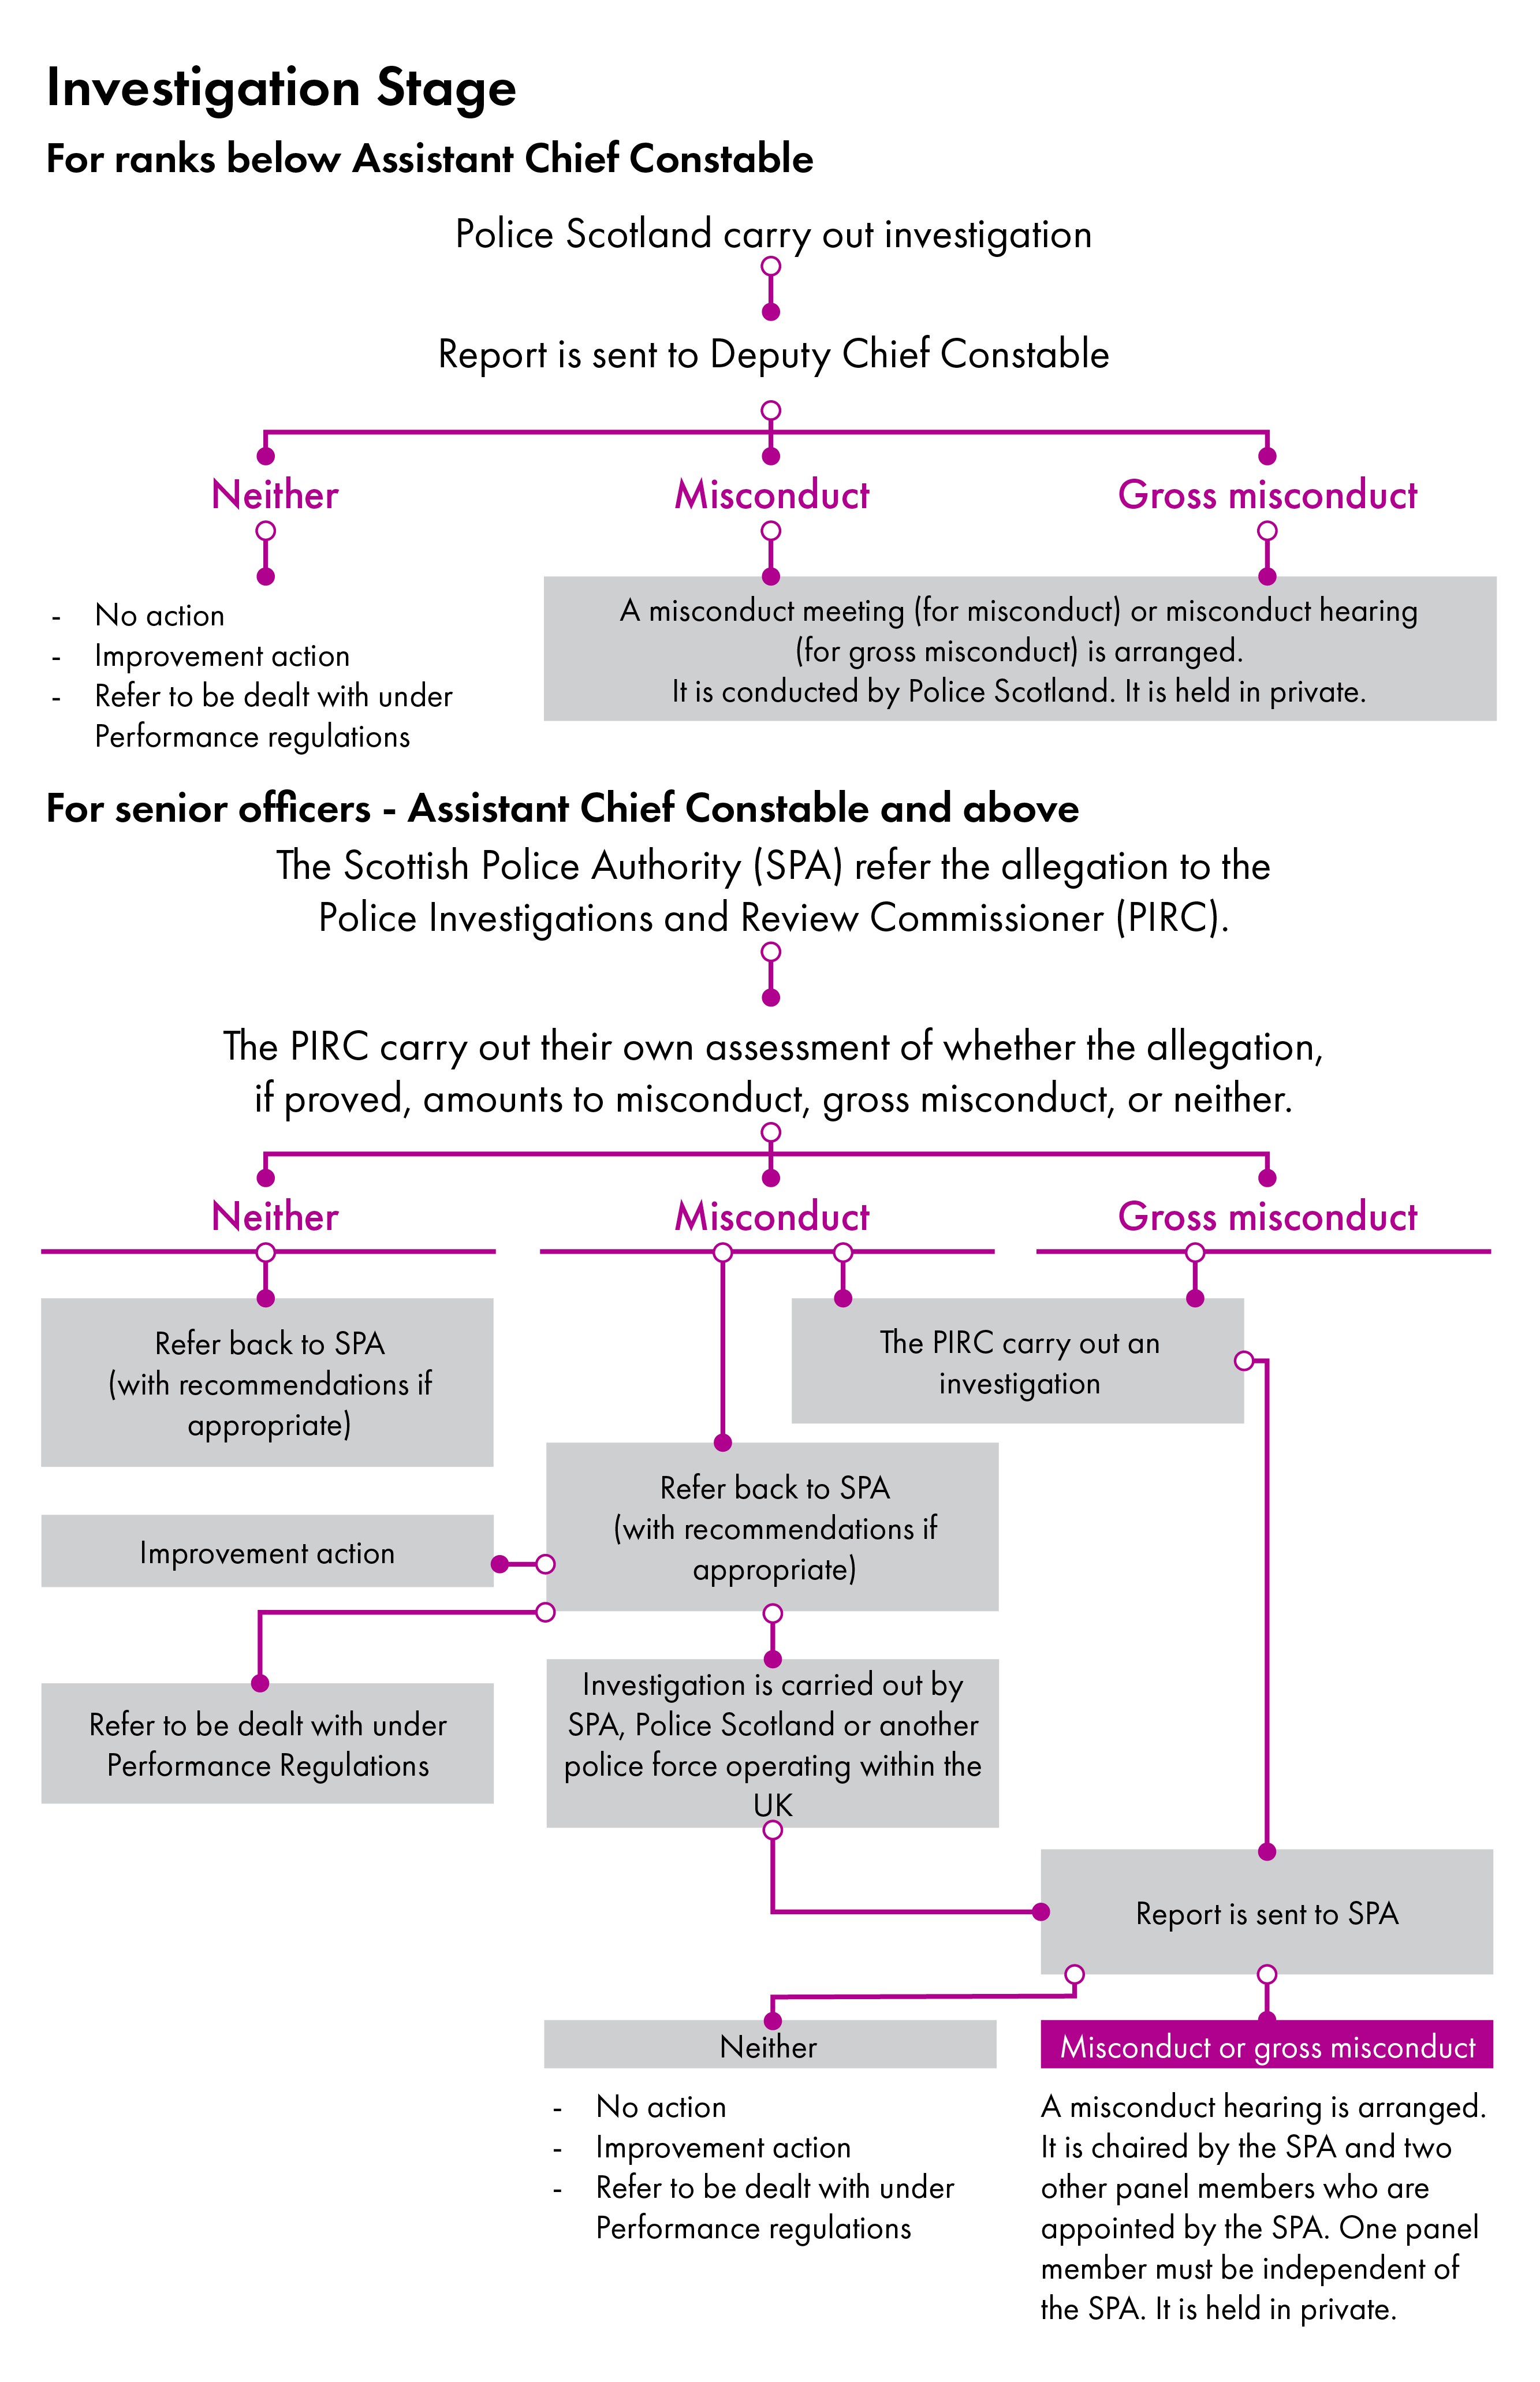 The image shows the investigation stage of the police misconduct process and the organisations involved at each stage.